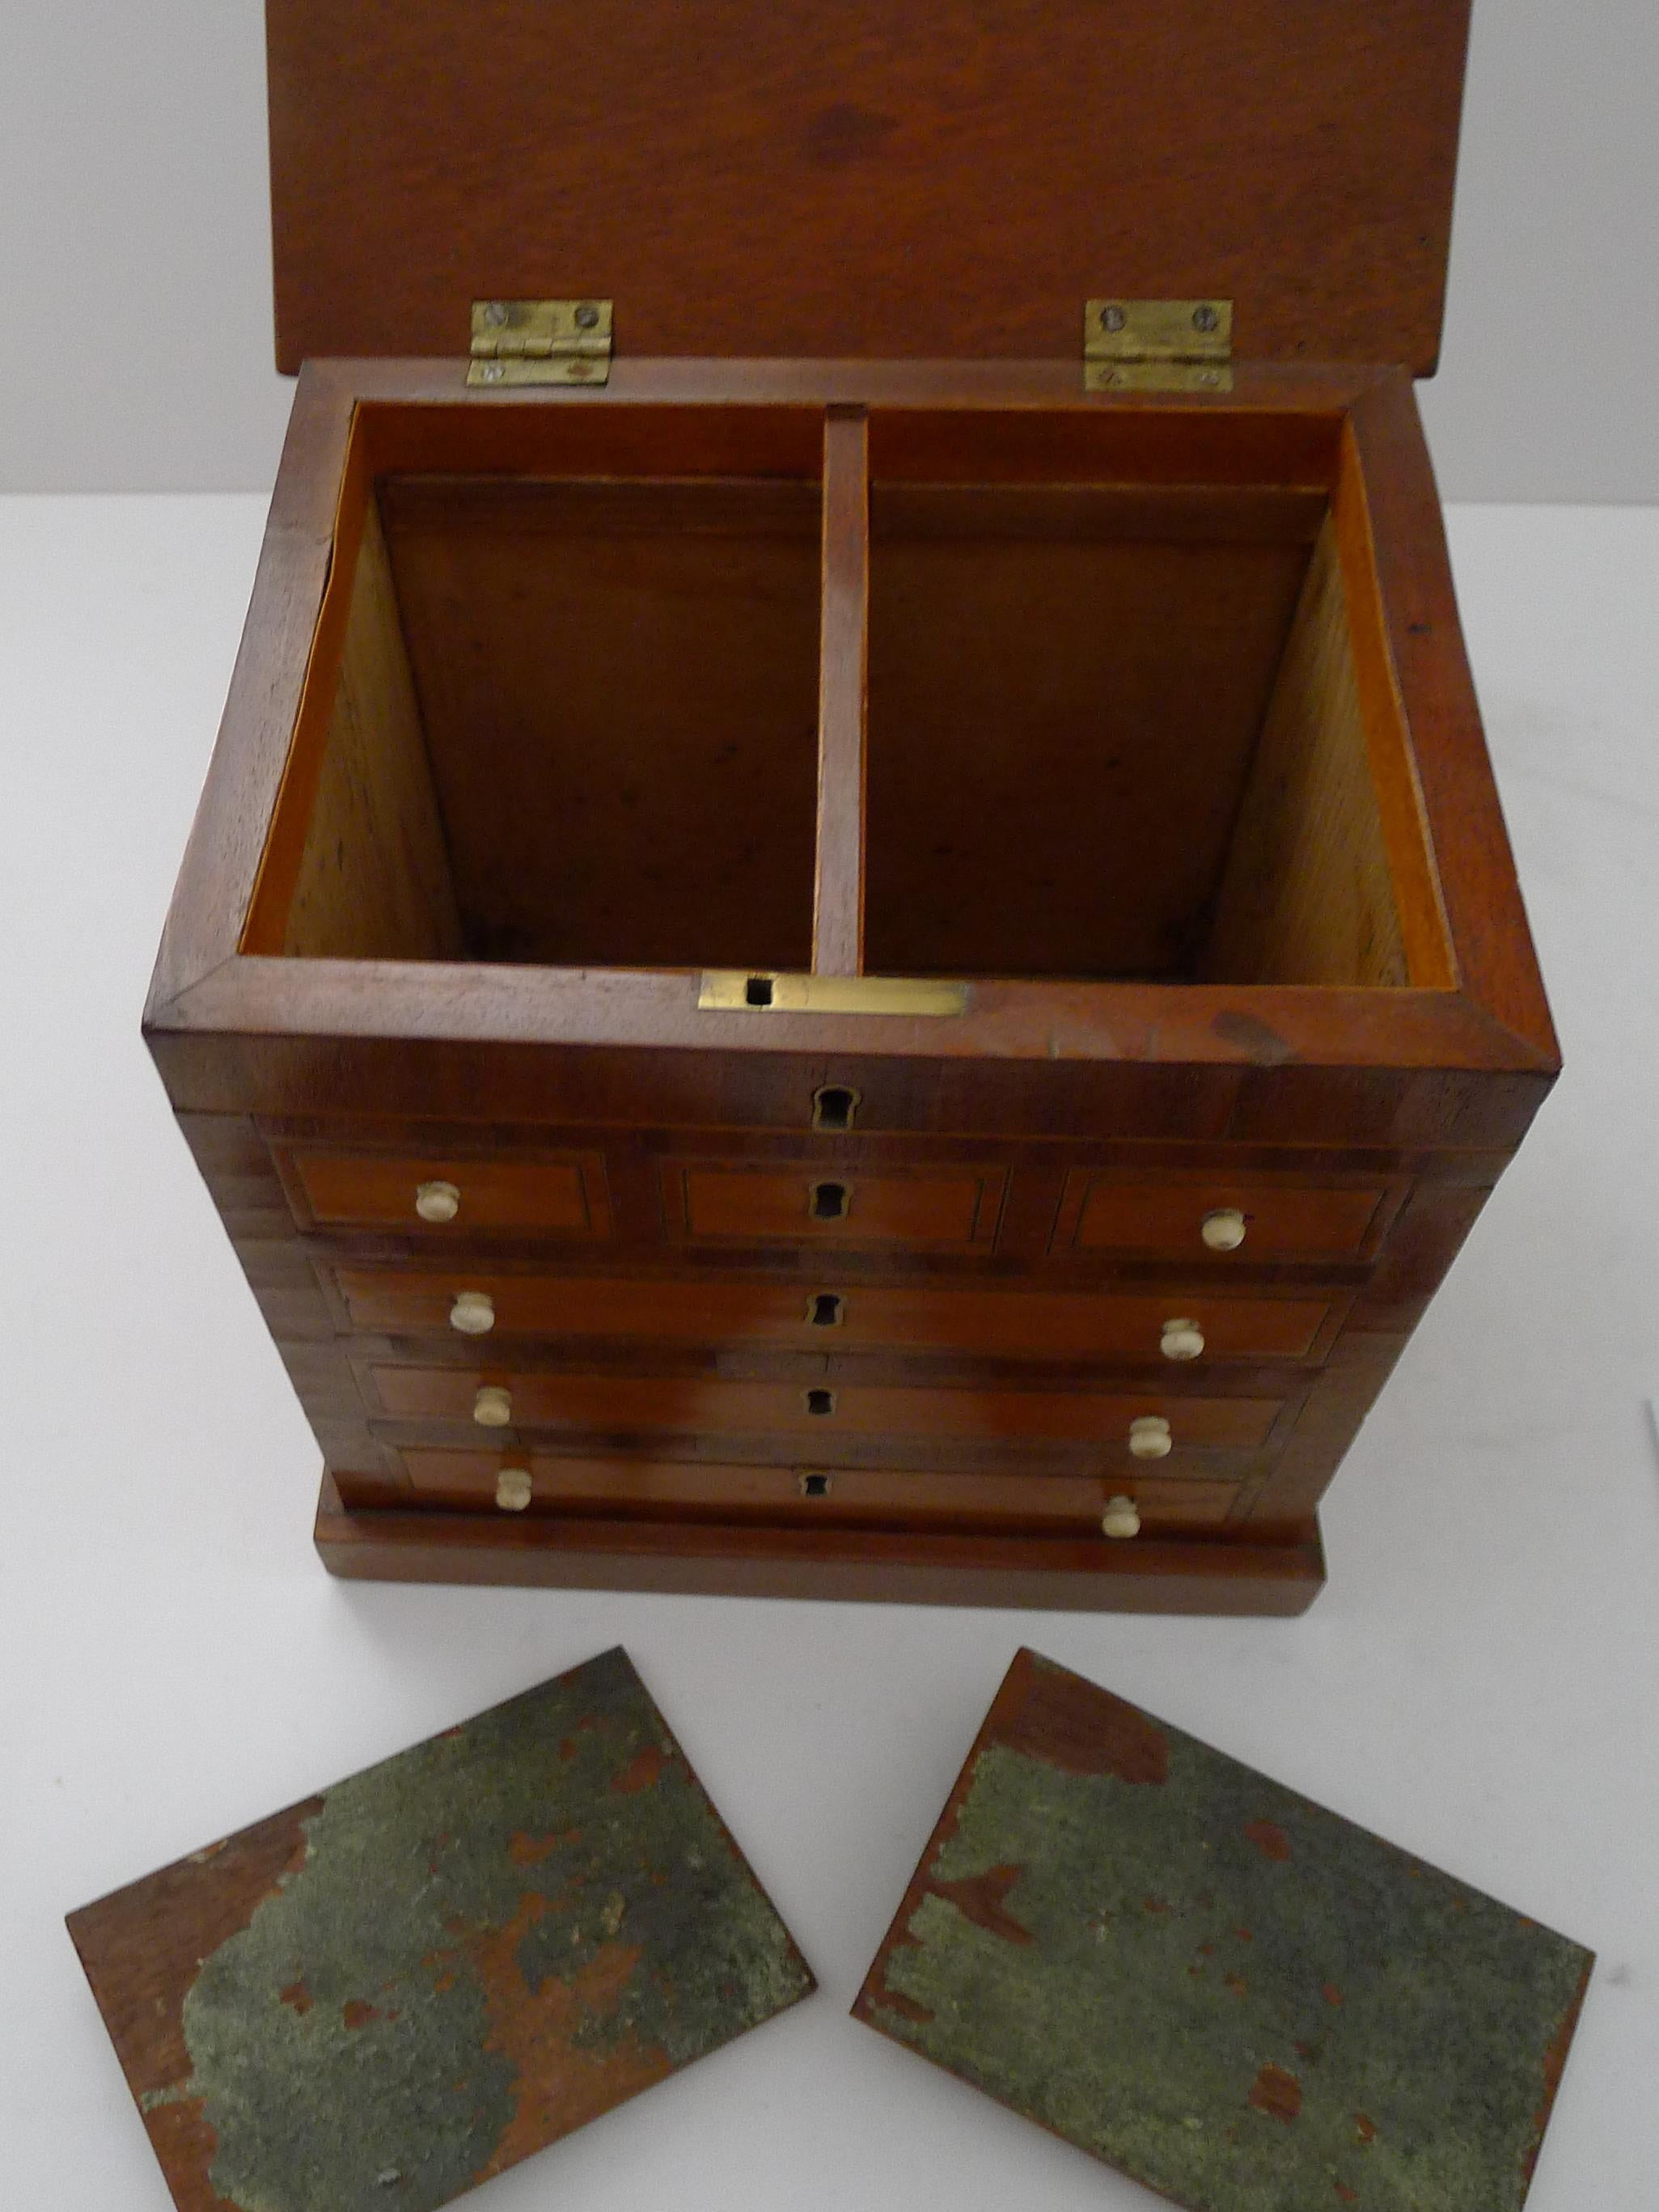 Rare English Mahogany Tea Caddy - Form of Chest of Drawers c.1880 For Sale 1